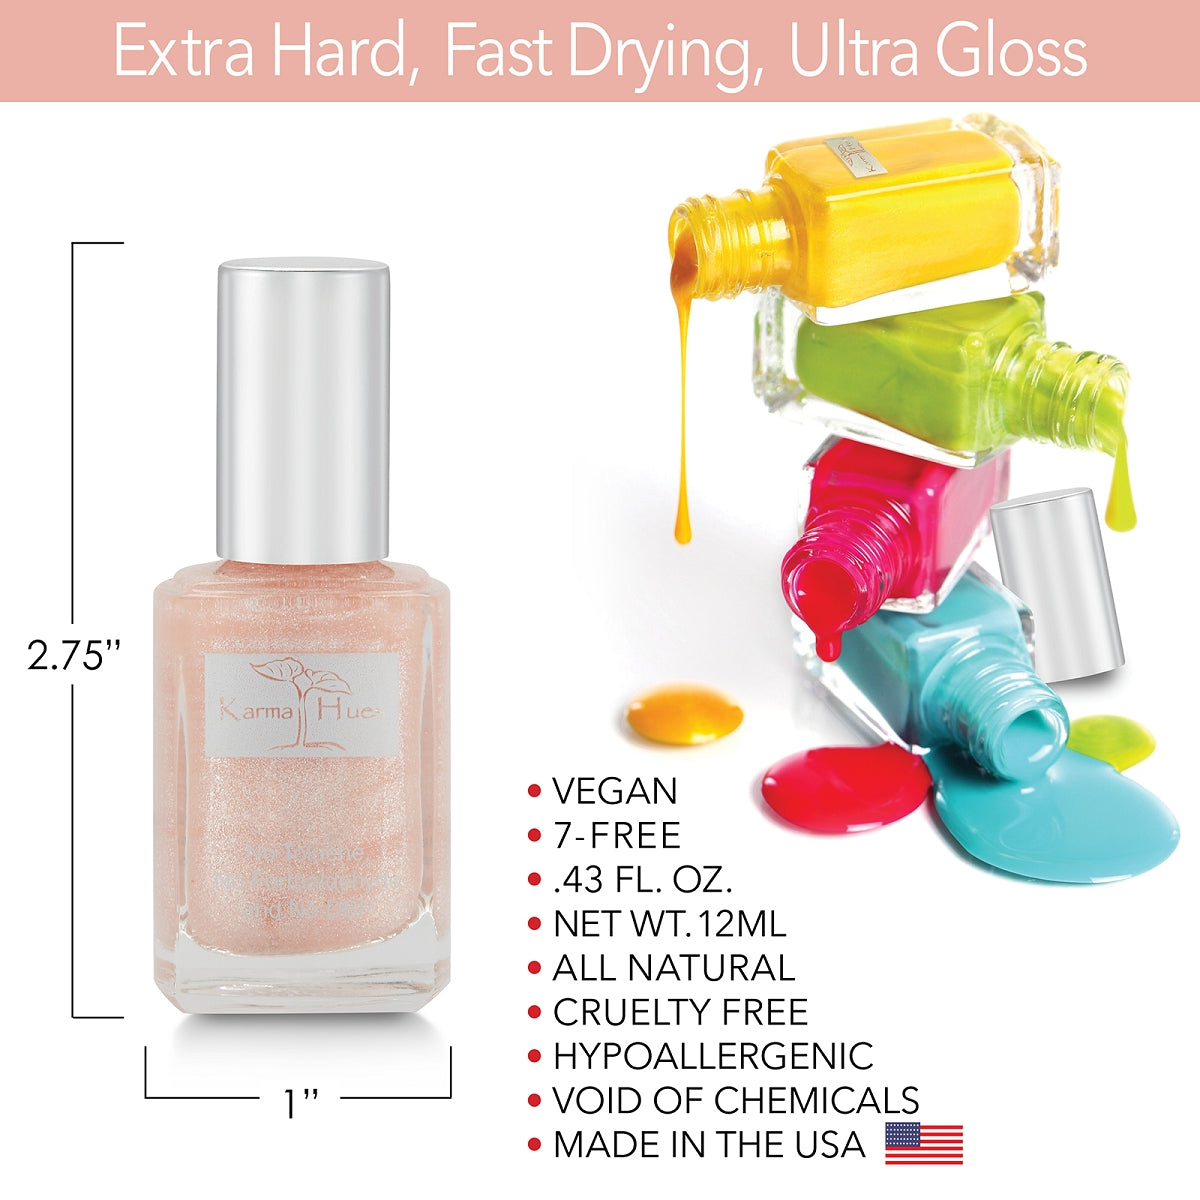 Champagne and Pearls - Nail Polish; Non-Toxic, Vegan, and Cruelty-Free (#329)